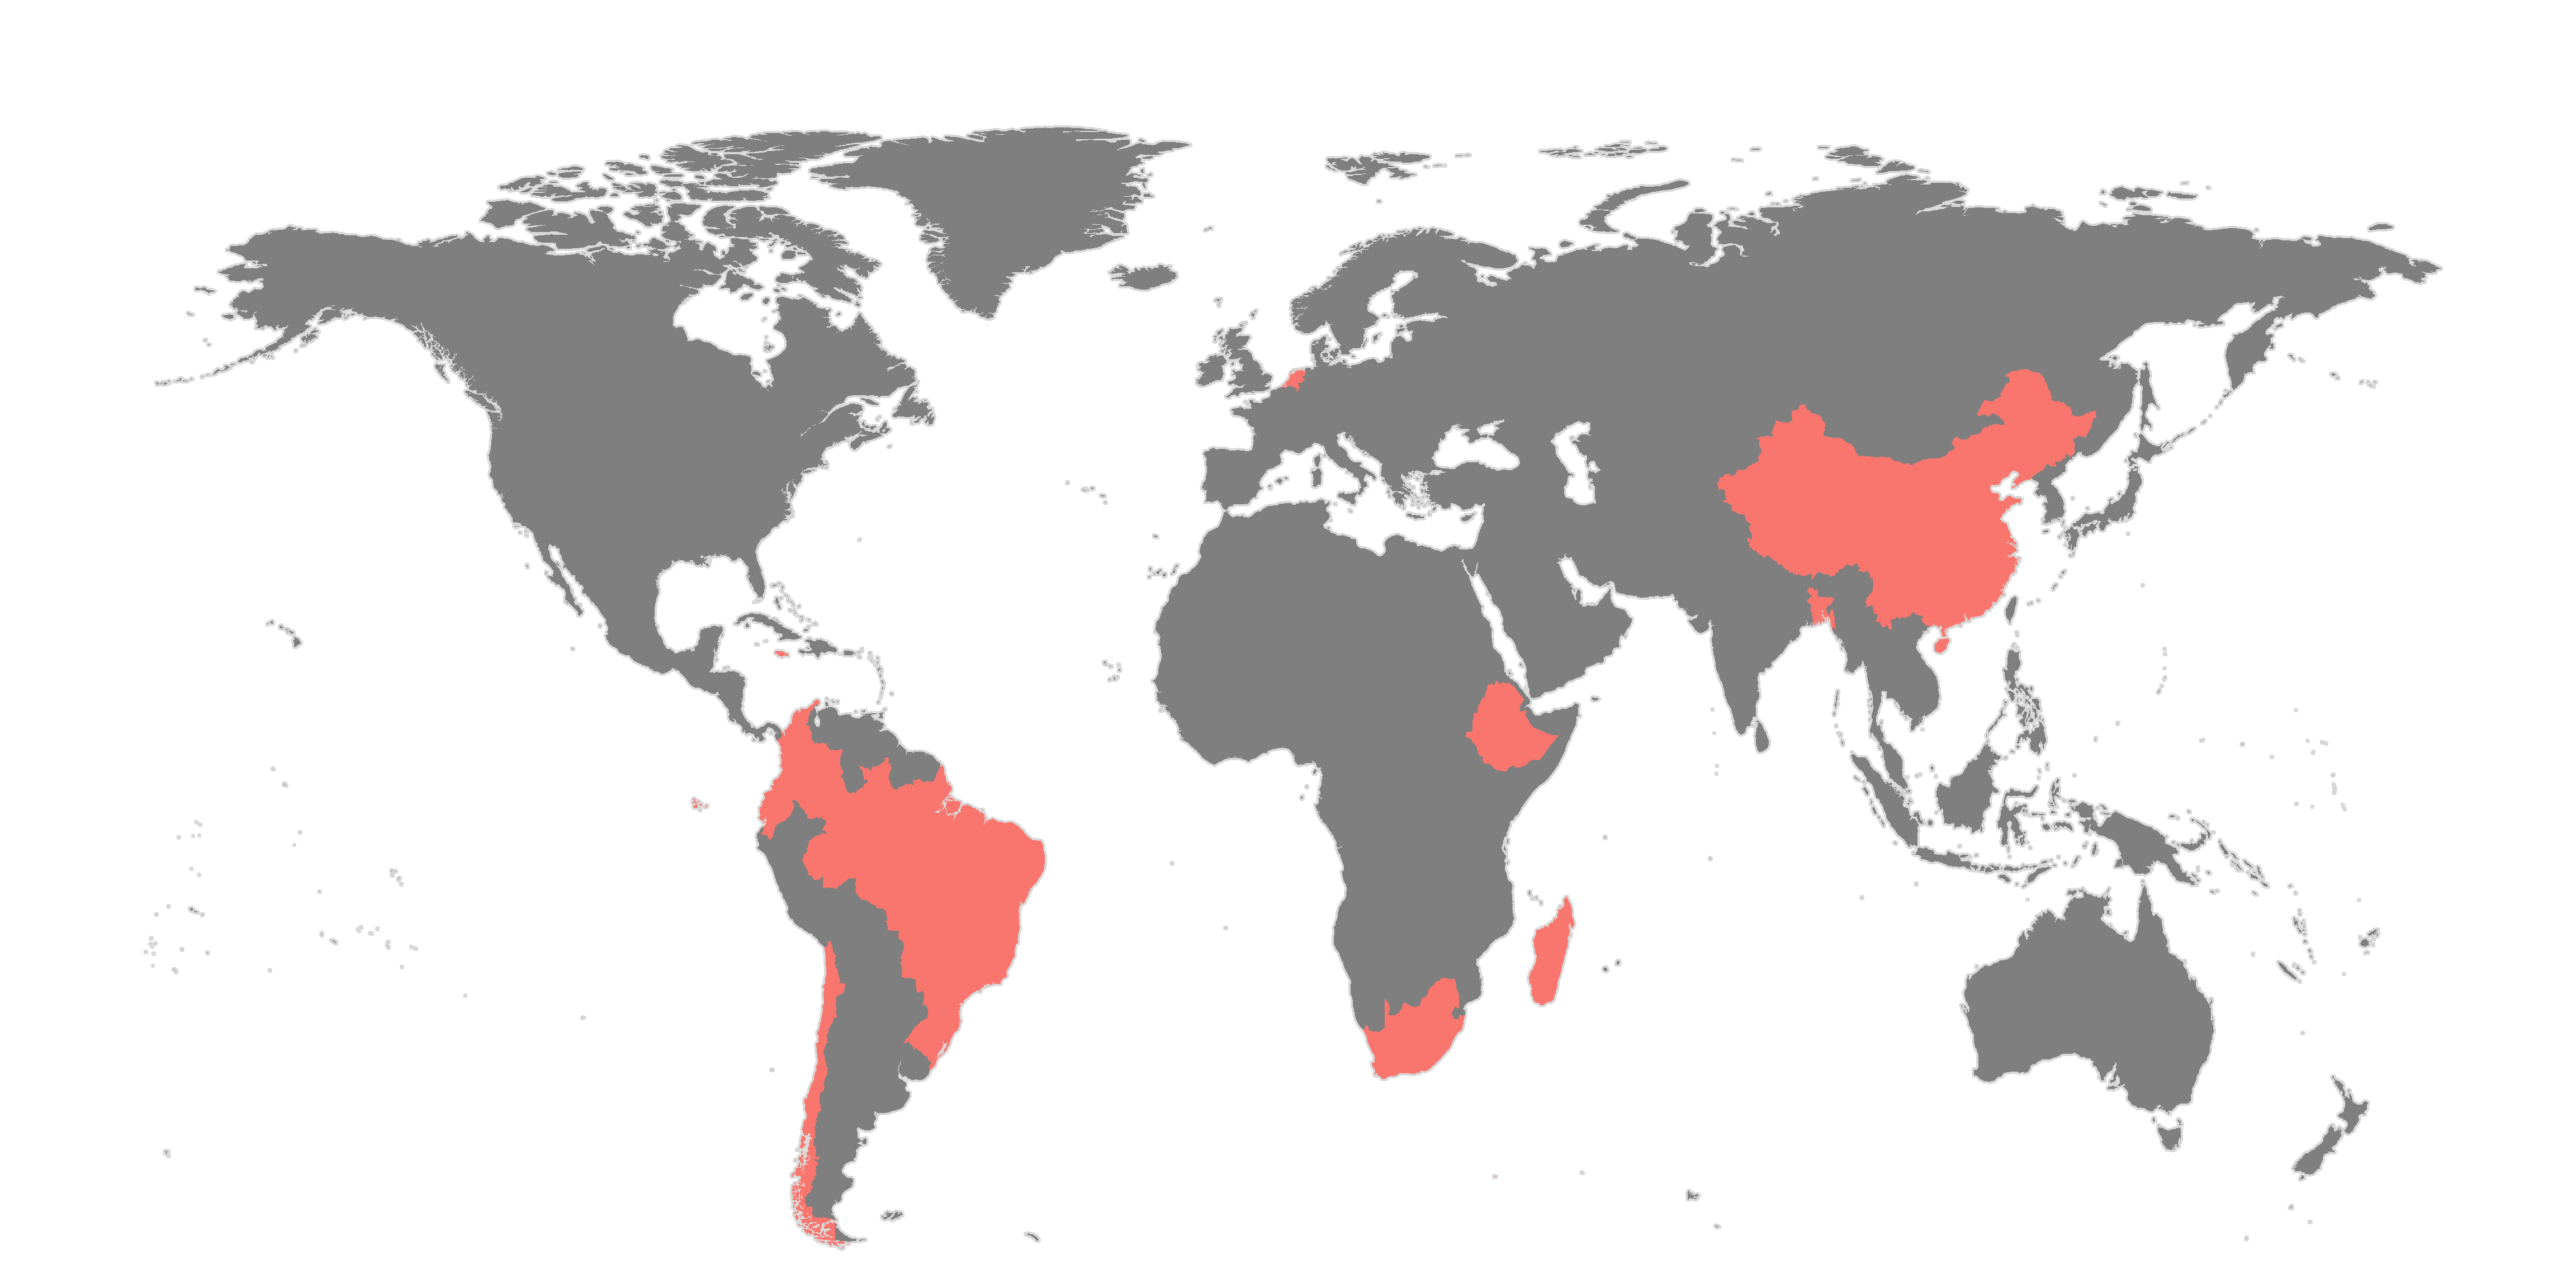 Coverage of countries included in the study.